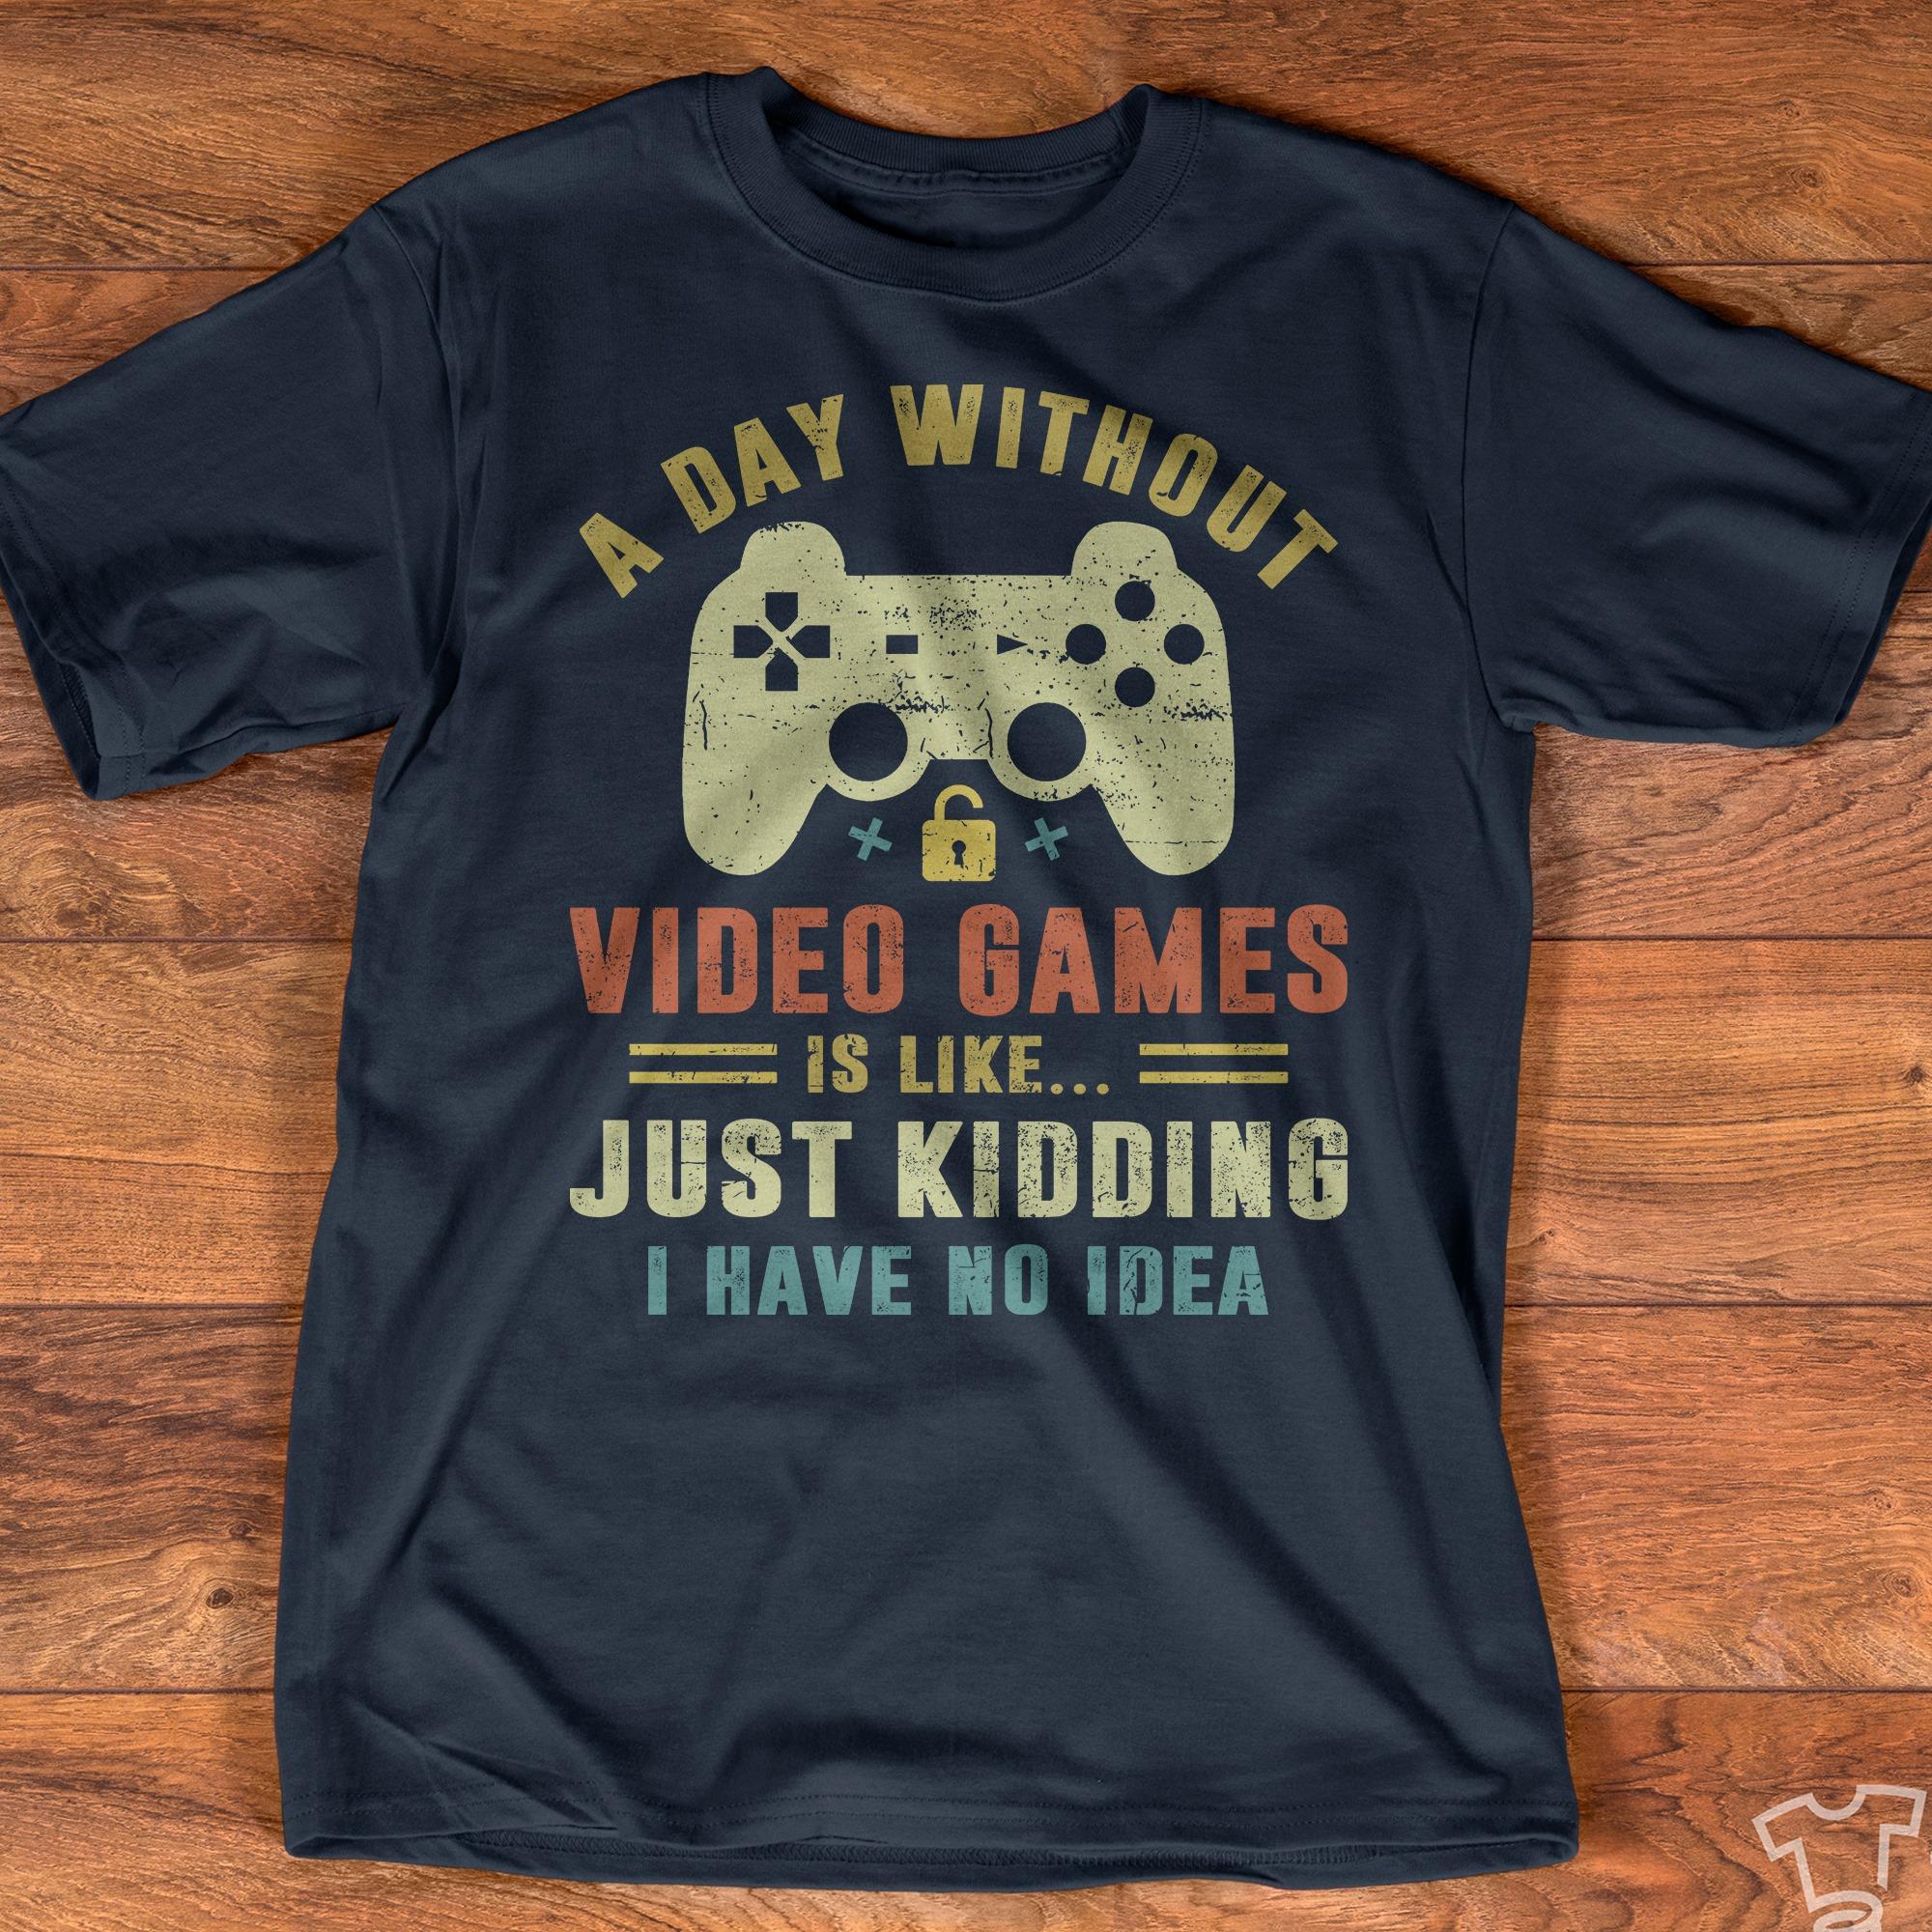 A day without video games is like just kidding - Video game lover, playstation game bar